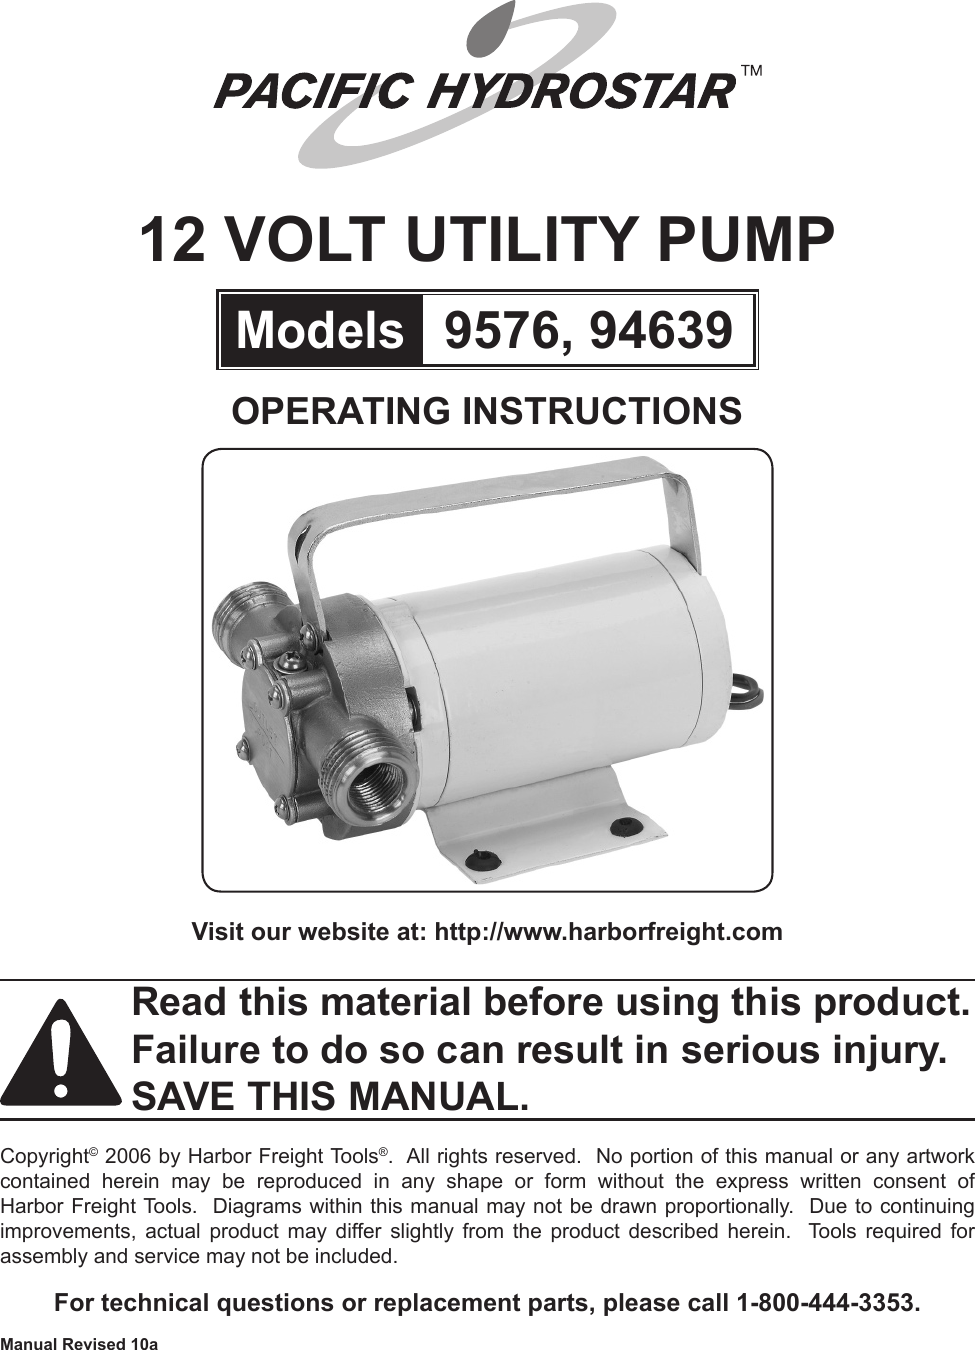 Page 1 of 8 - Harbor-Freight Harbor-Freight-12-Volt-Marine-Utility-Pump-Product-Manual-  Harbor-freight-12-volt-marine-utility-pump-product-manual